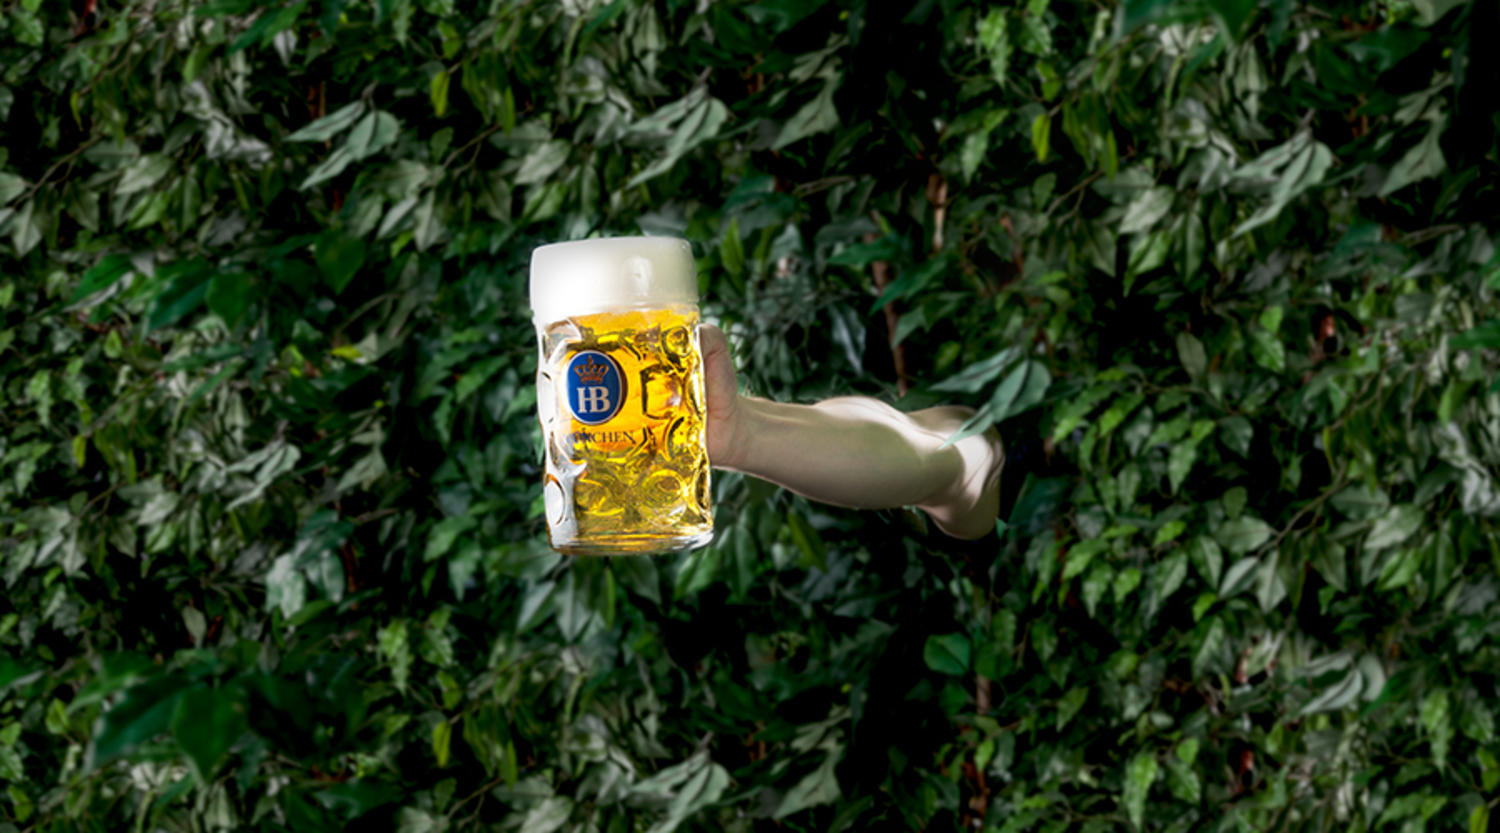 People Holding Steins Maybe The One With The Arms Coming Out Of The Trees Main.0d3987a5e5ece0c6bb012b72583d3e01